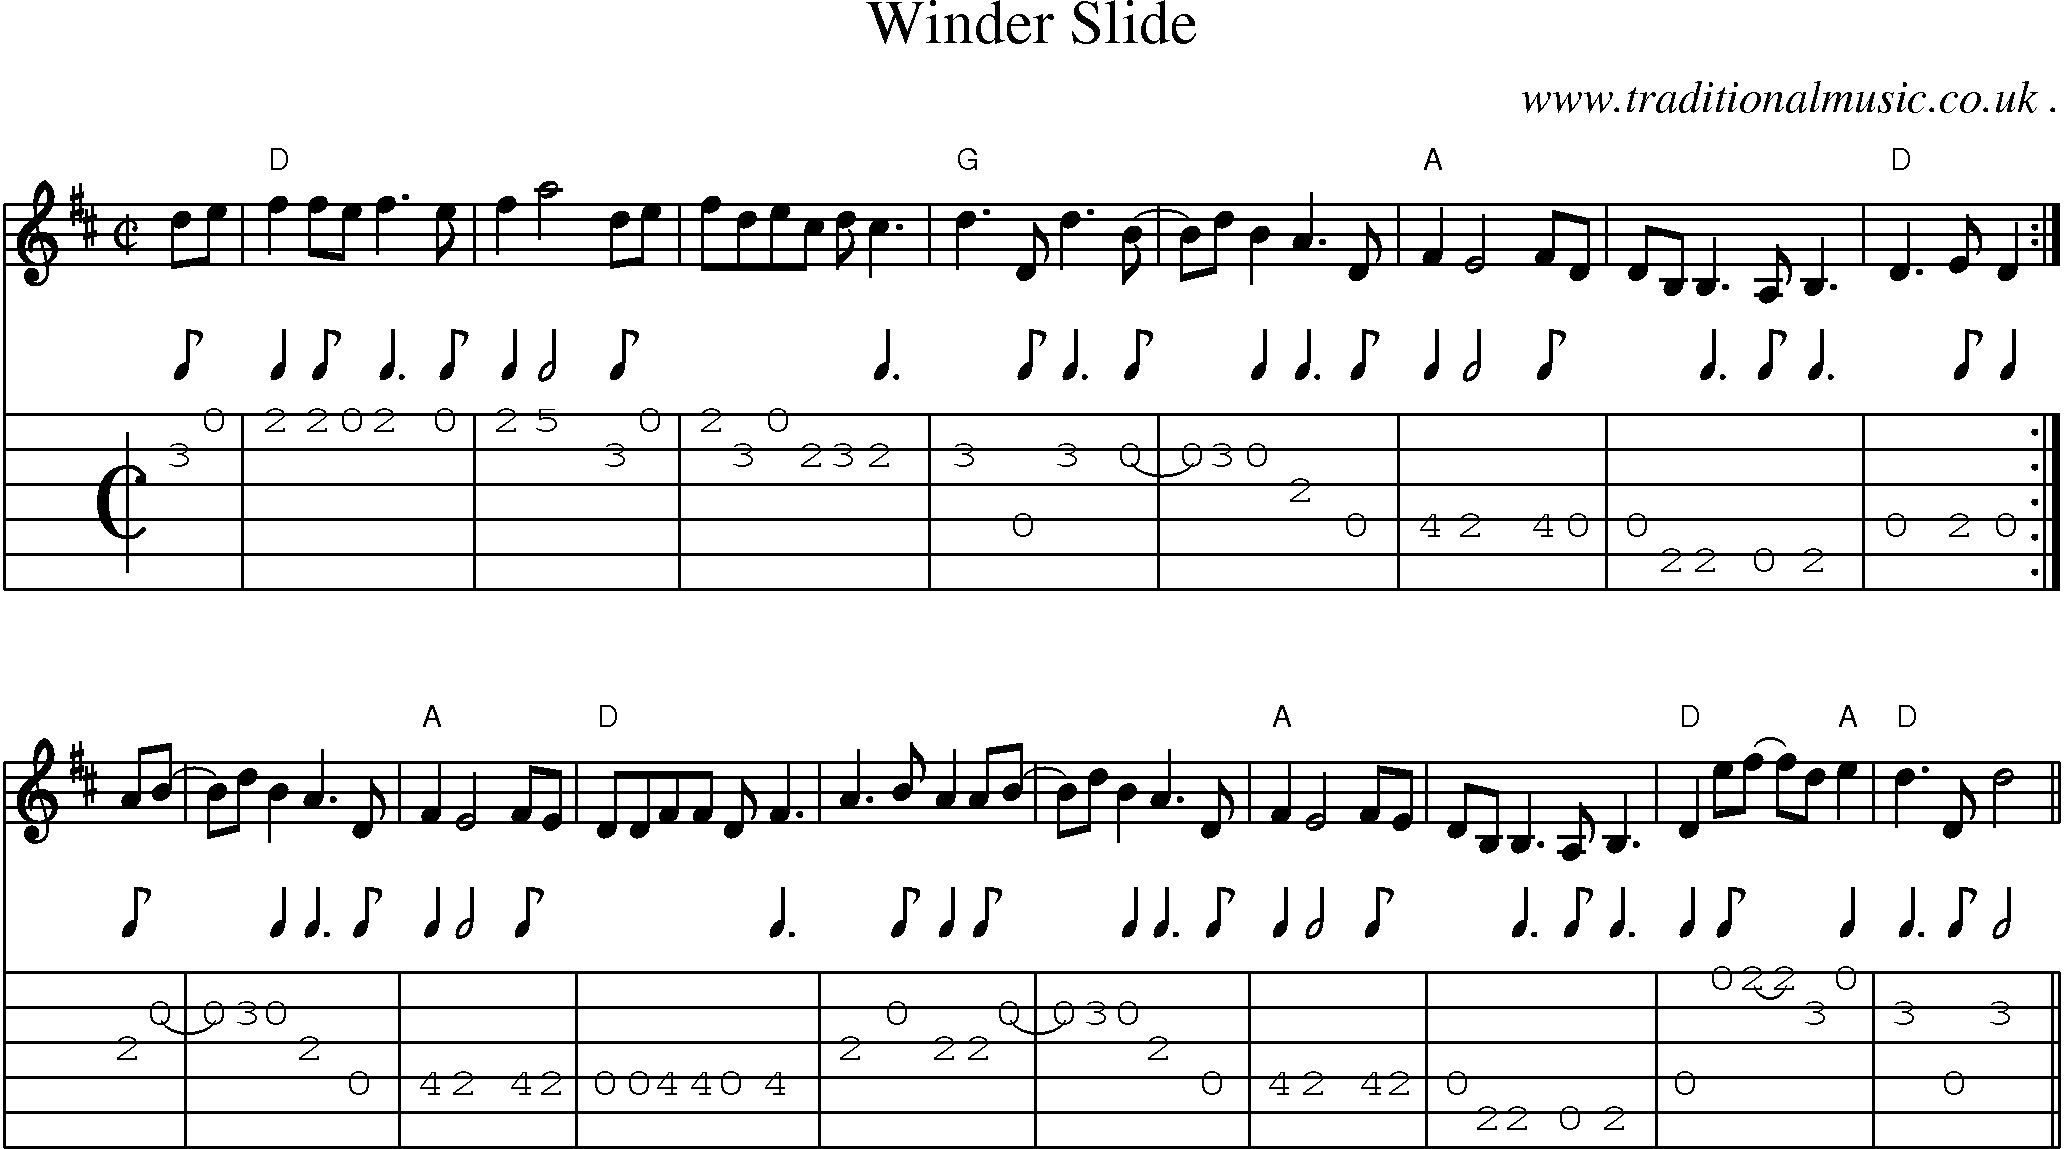 Music Score and Guitar Tabs for Winder Slide